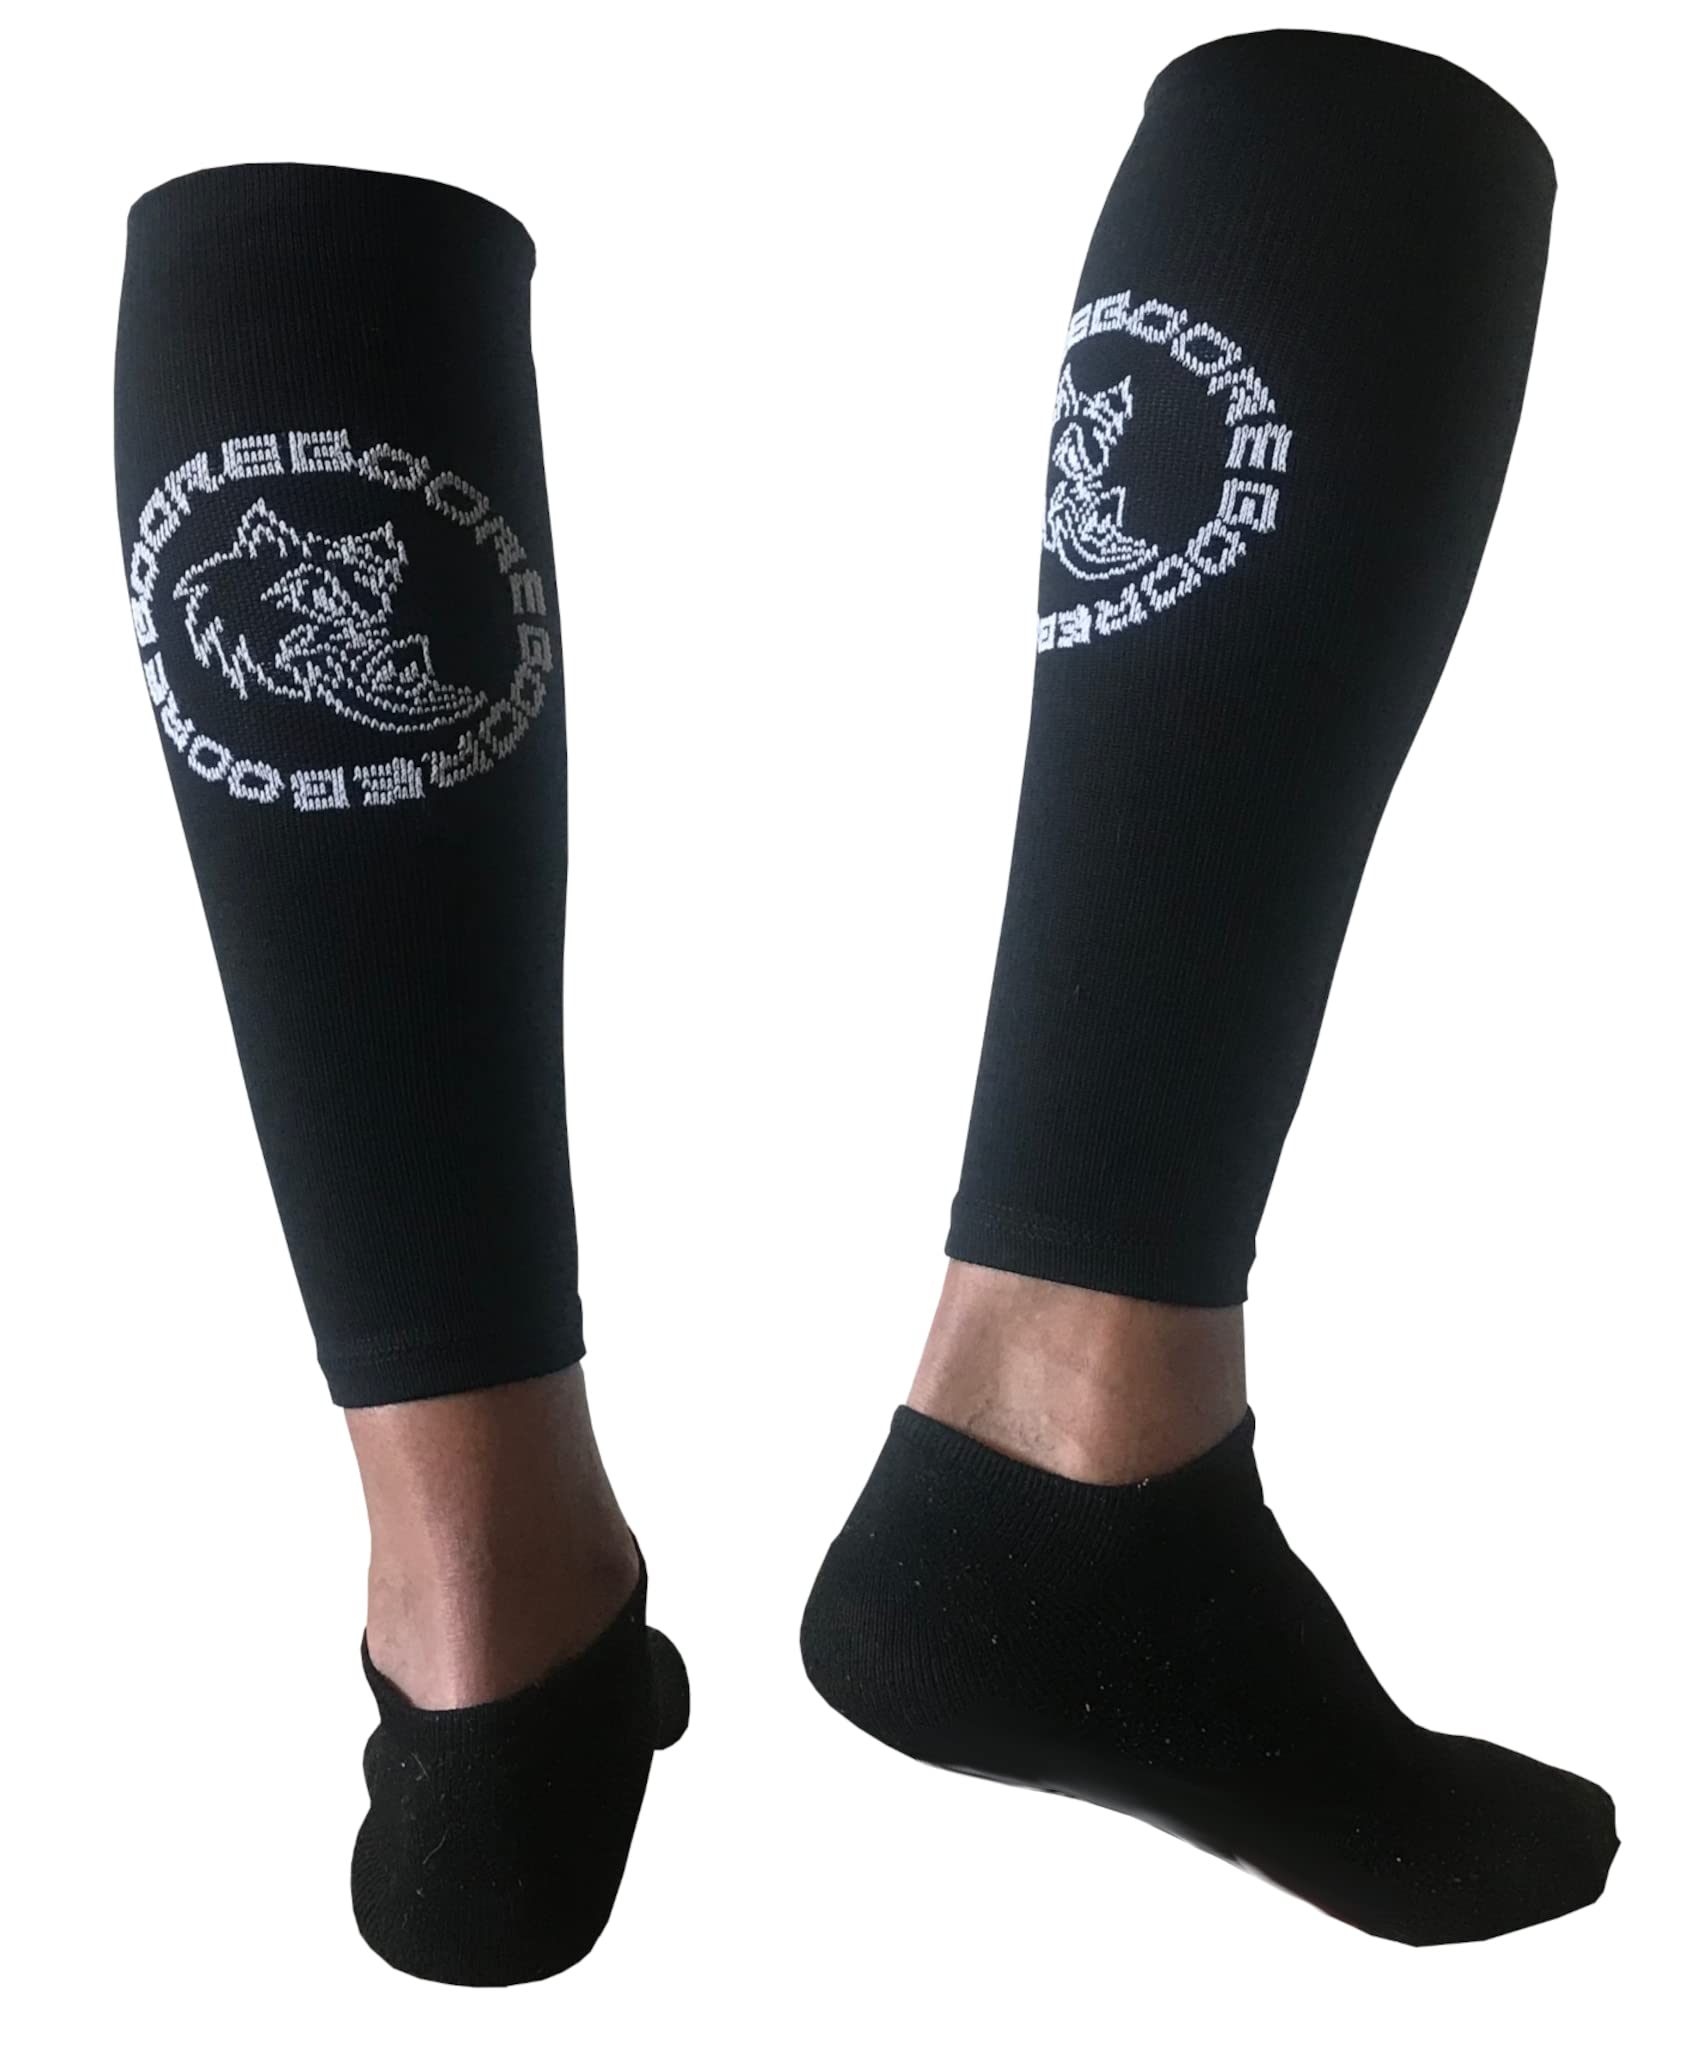 BOORE Calf Sleeves OCR Deadlift Sleeves Compression Sleeve for Men Women. Footless  Compression Sock for Fitness